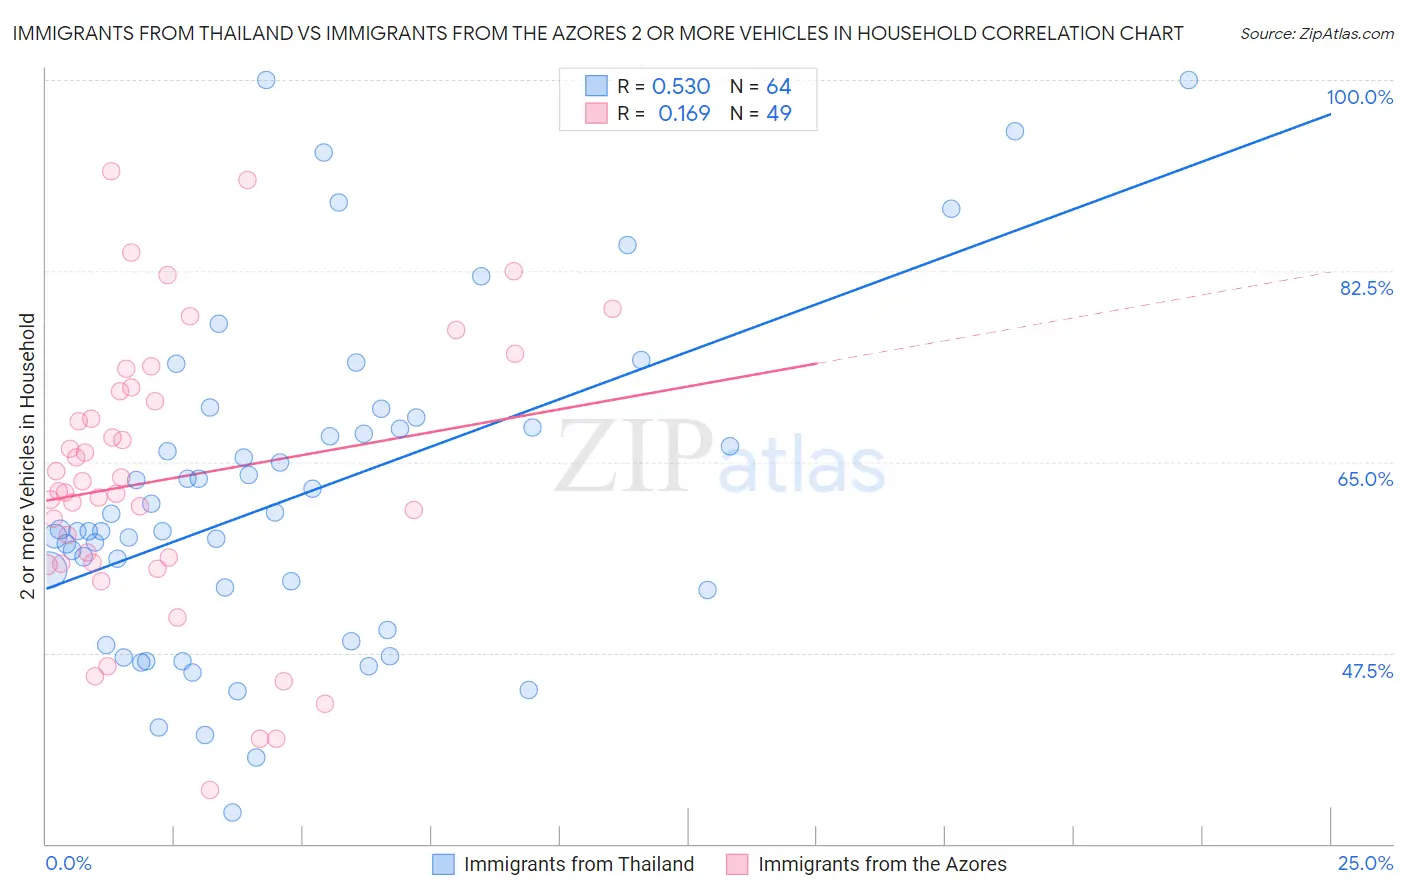 Immigrants from Thailand vs Immigrants from the Azores 2 or more Vehicles in Household